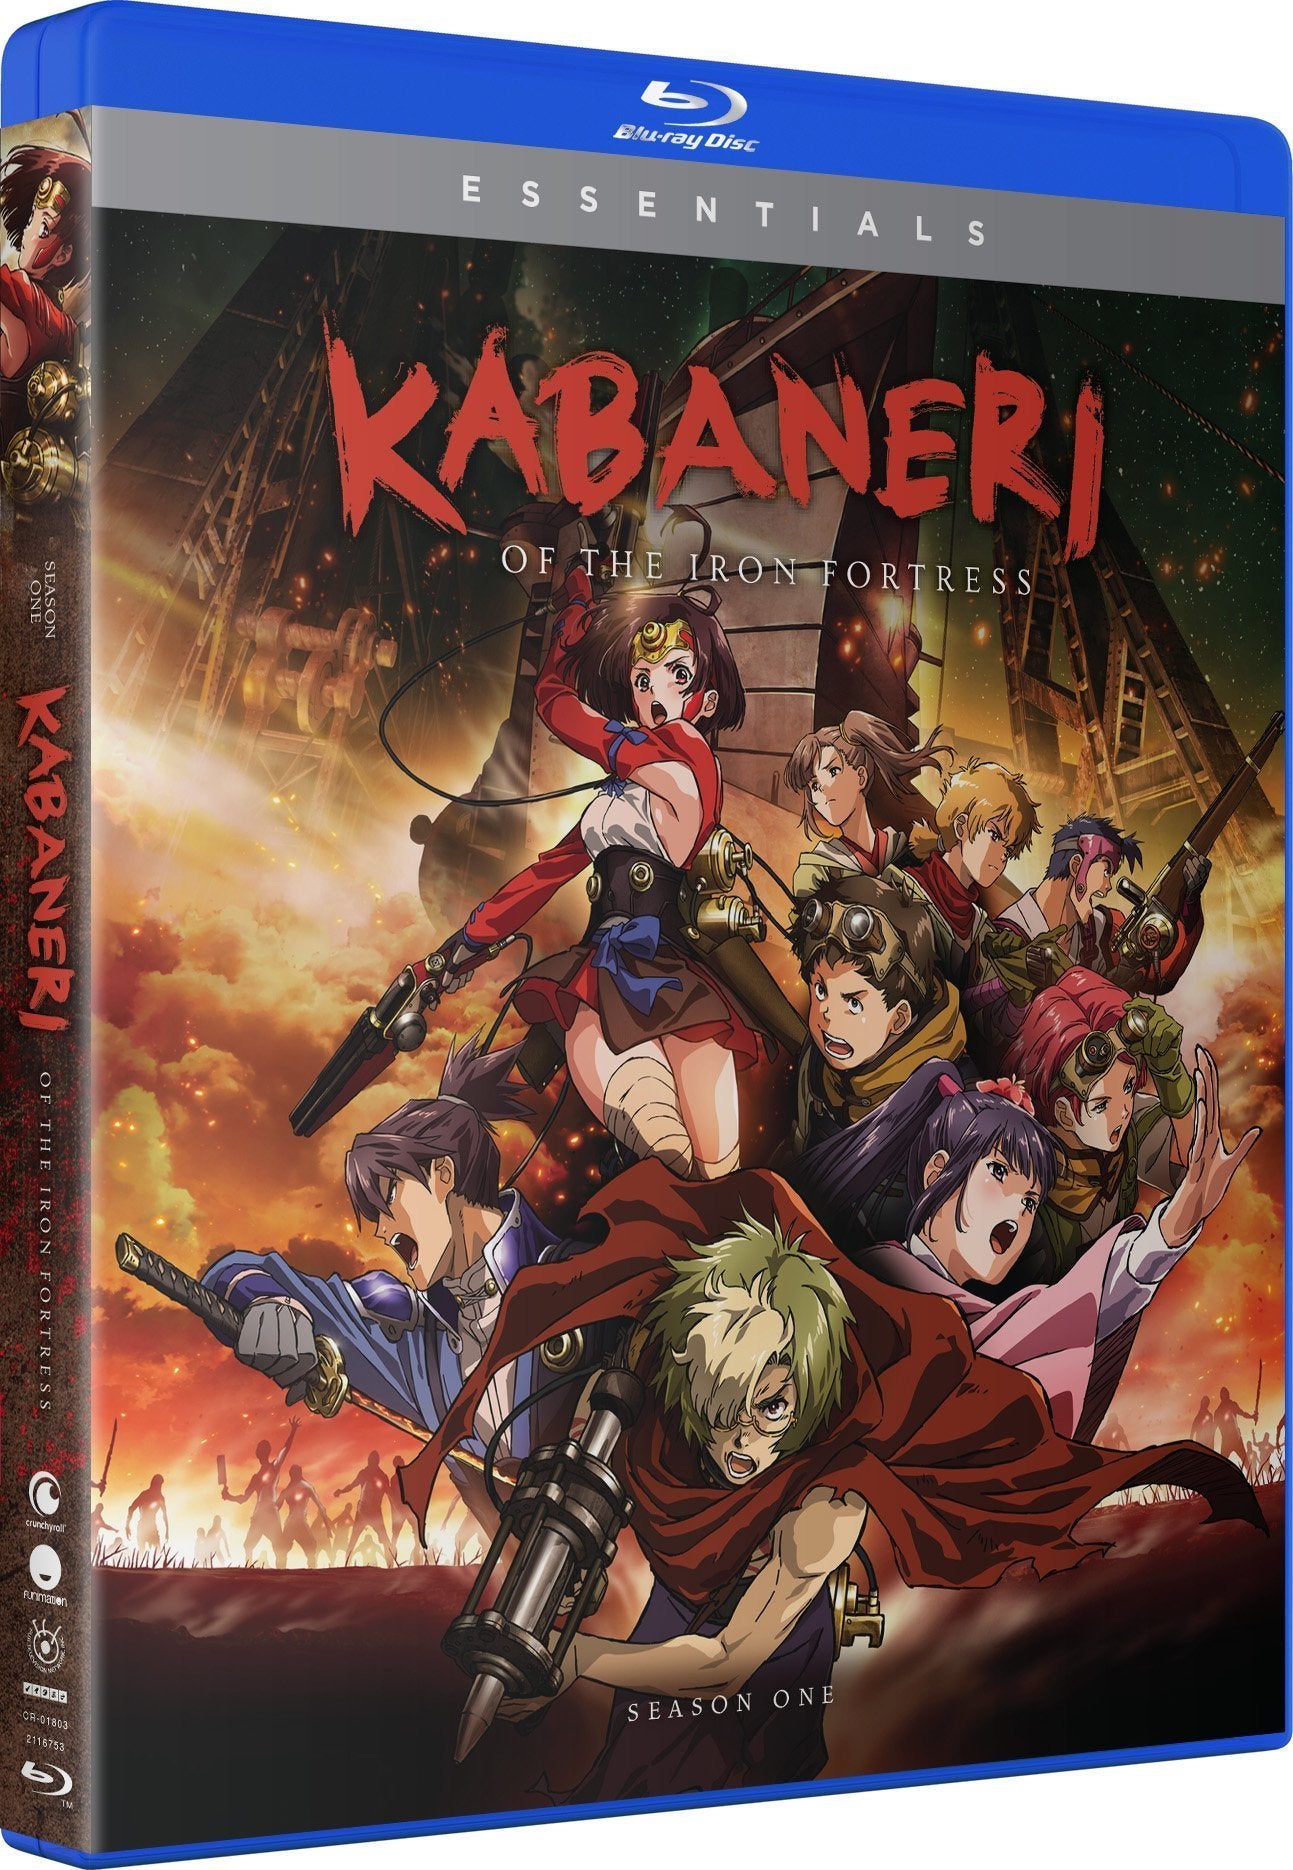 Kabaneri of the Iron Fortress - Season 1 - Essentials - Blu-ray image count 1